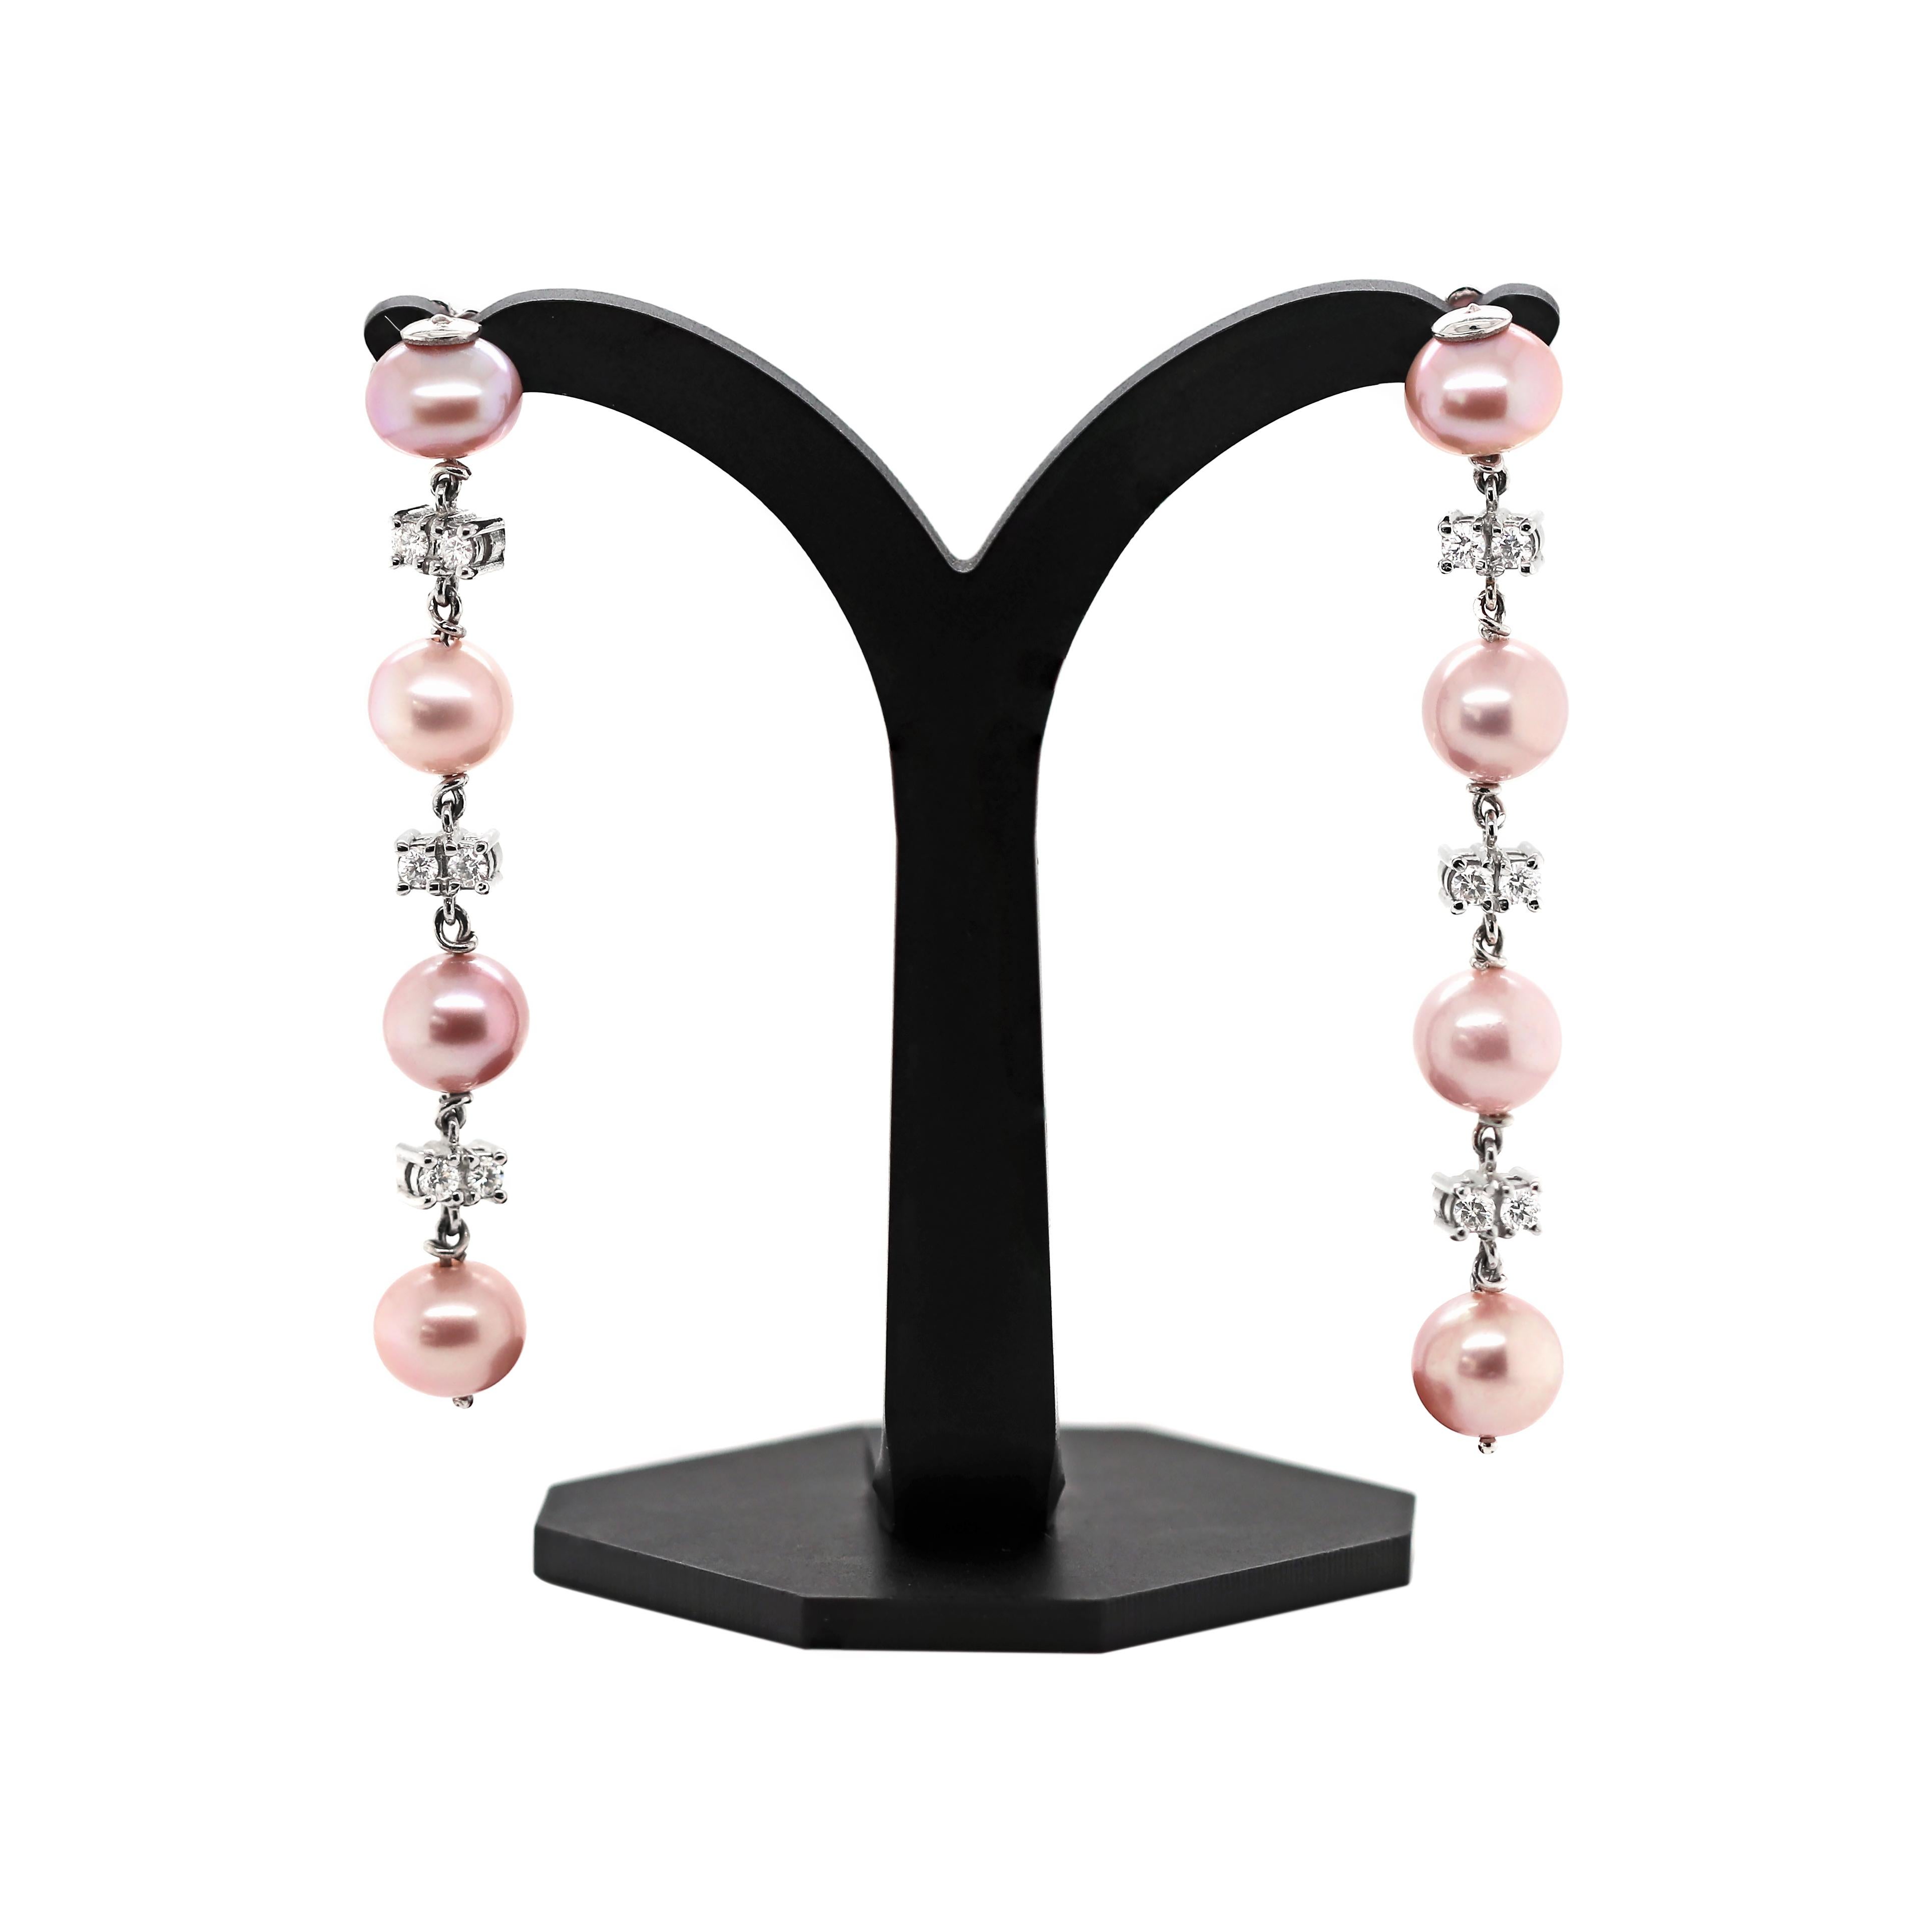 These elegant earrings feature four round rosé coloured freshwater pearls in each. The pearls are beautifully accompanied by six round brilliant cut diamonds, two in between each pearl, mounted in four claw open back settings. The total combined